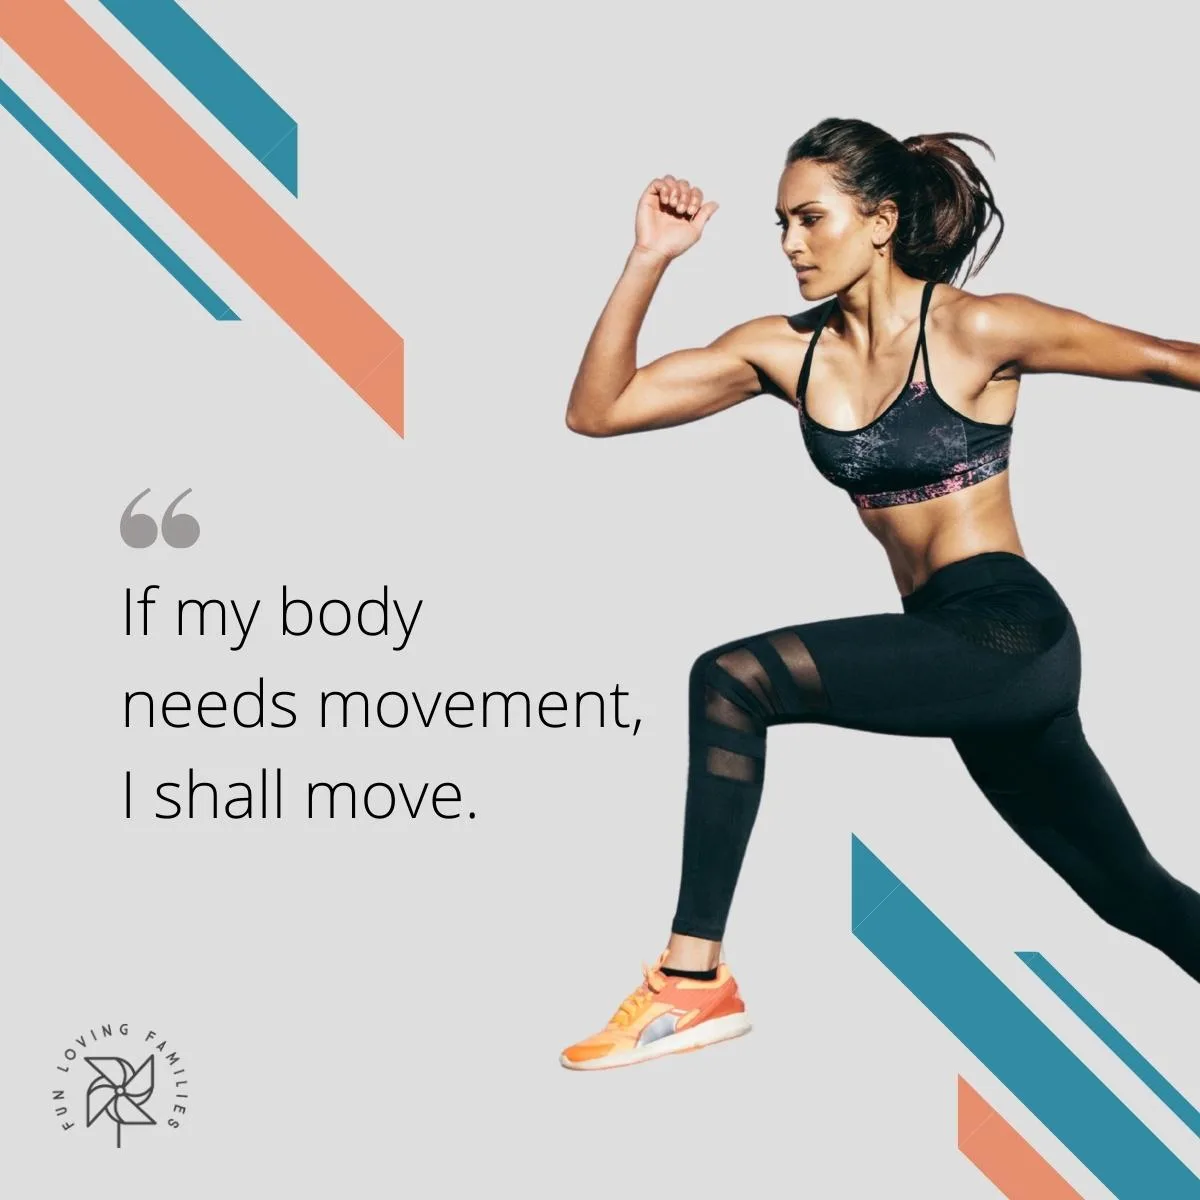 If my body needs movement, I shall move affirmation